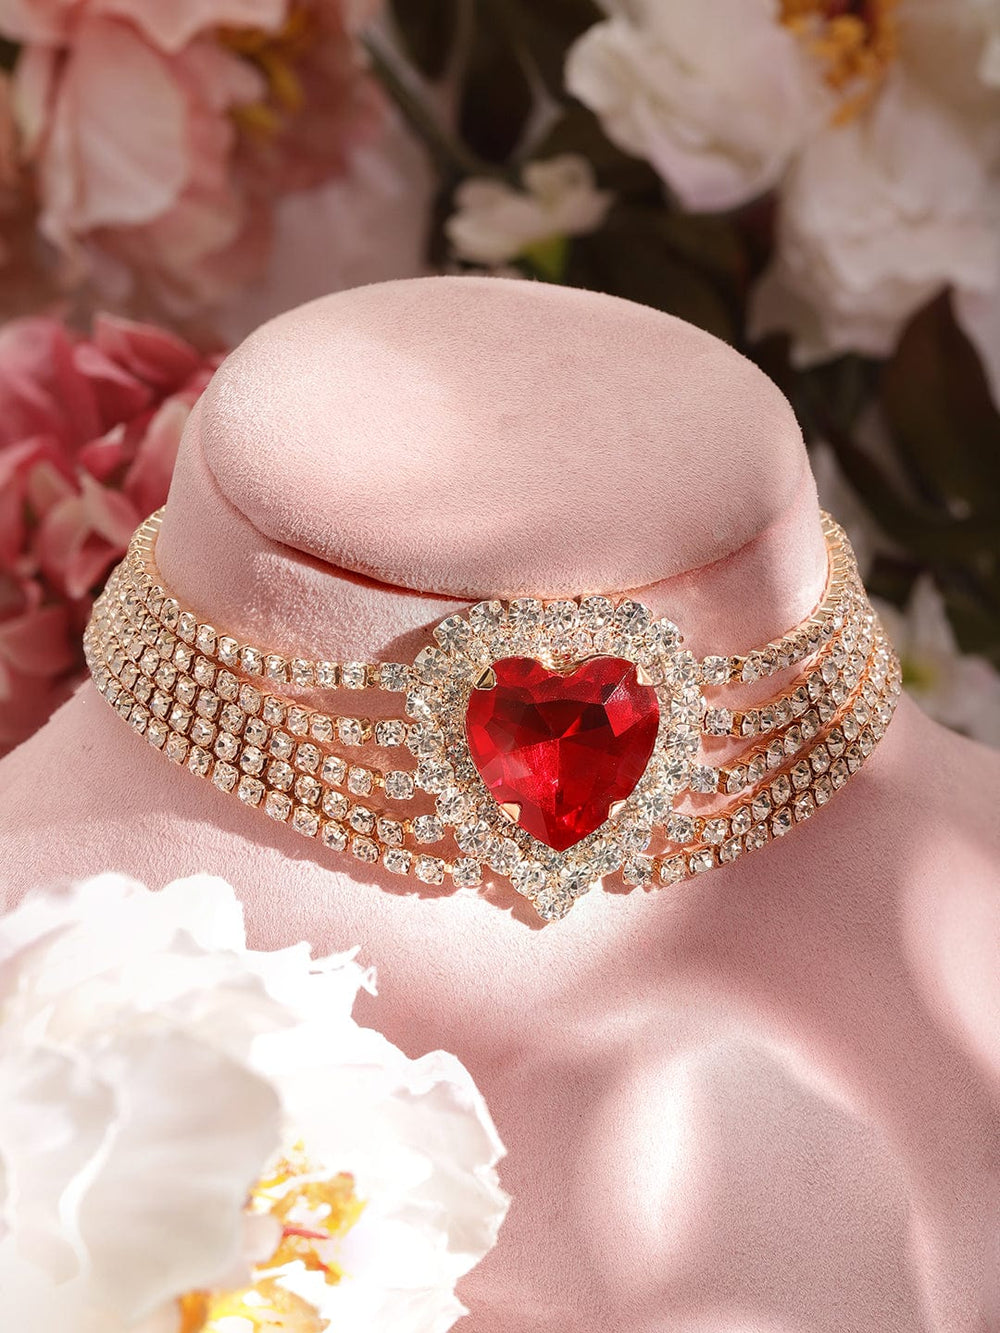 22 KT Gold-Plated Heart-Shaped Ruby embered Choker with Sparkling AD Accents Necklaces, Necklace Sets, Chains & Mangalsutra